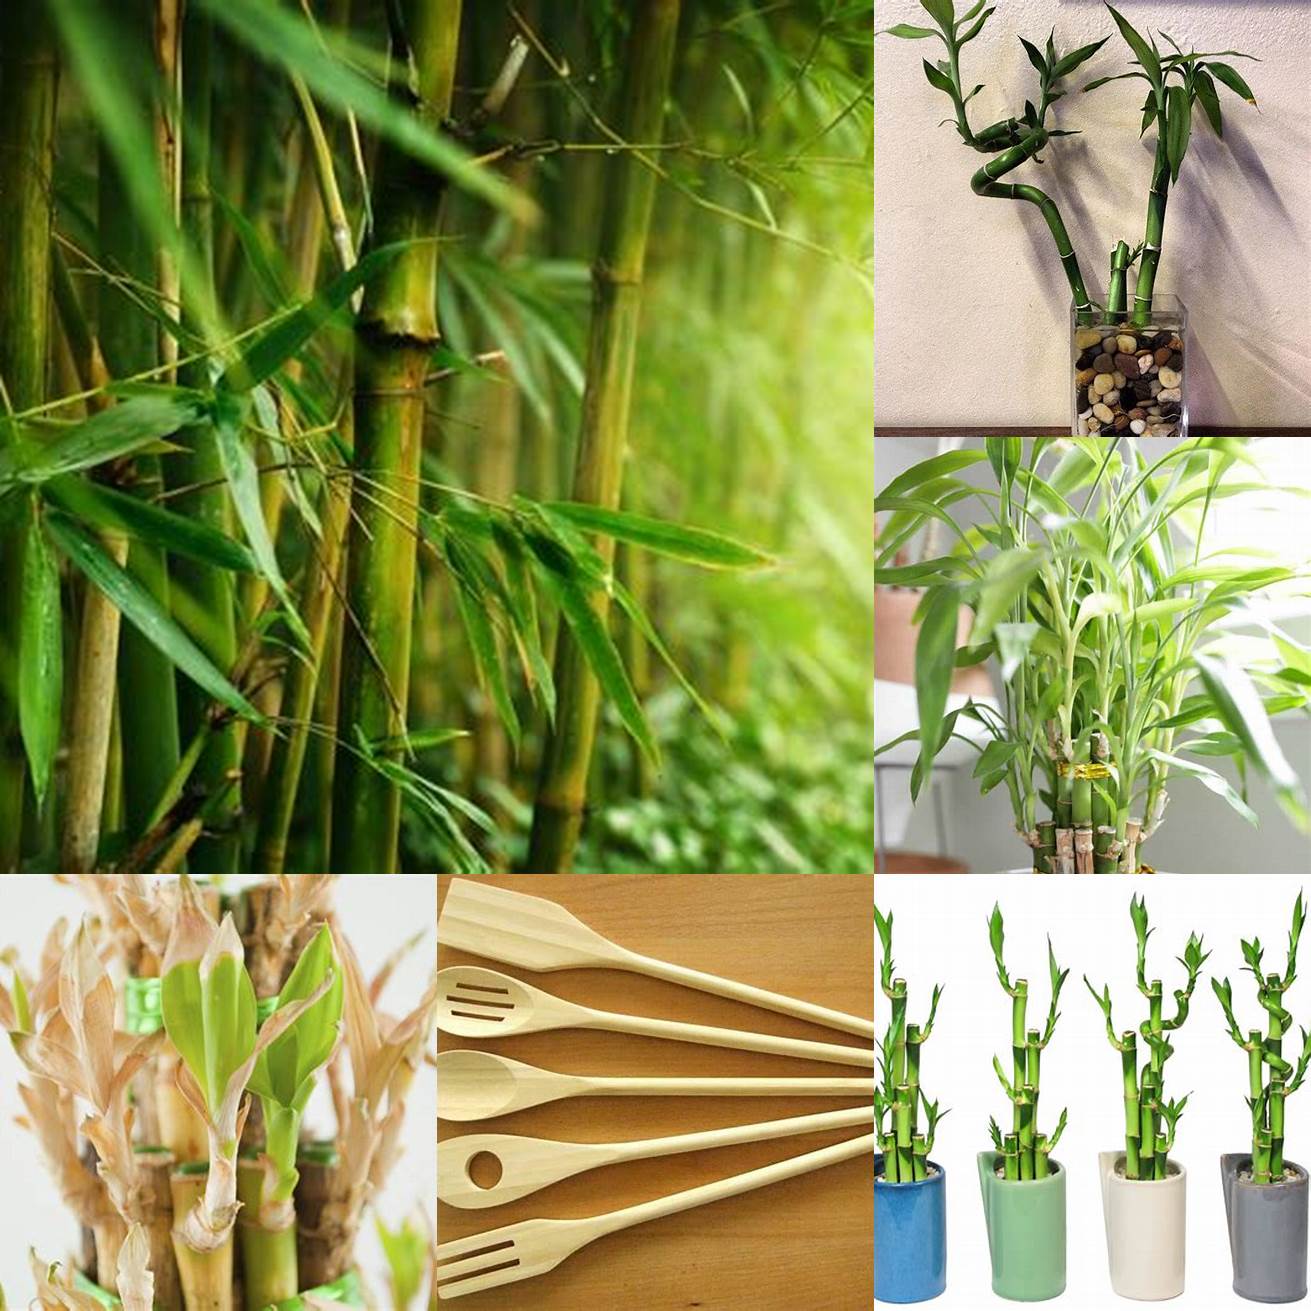 Keep bamboo products away from direct sunlight and moisture